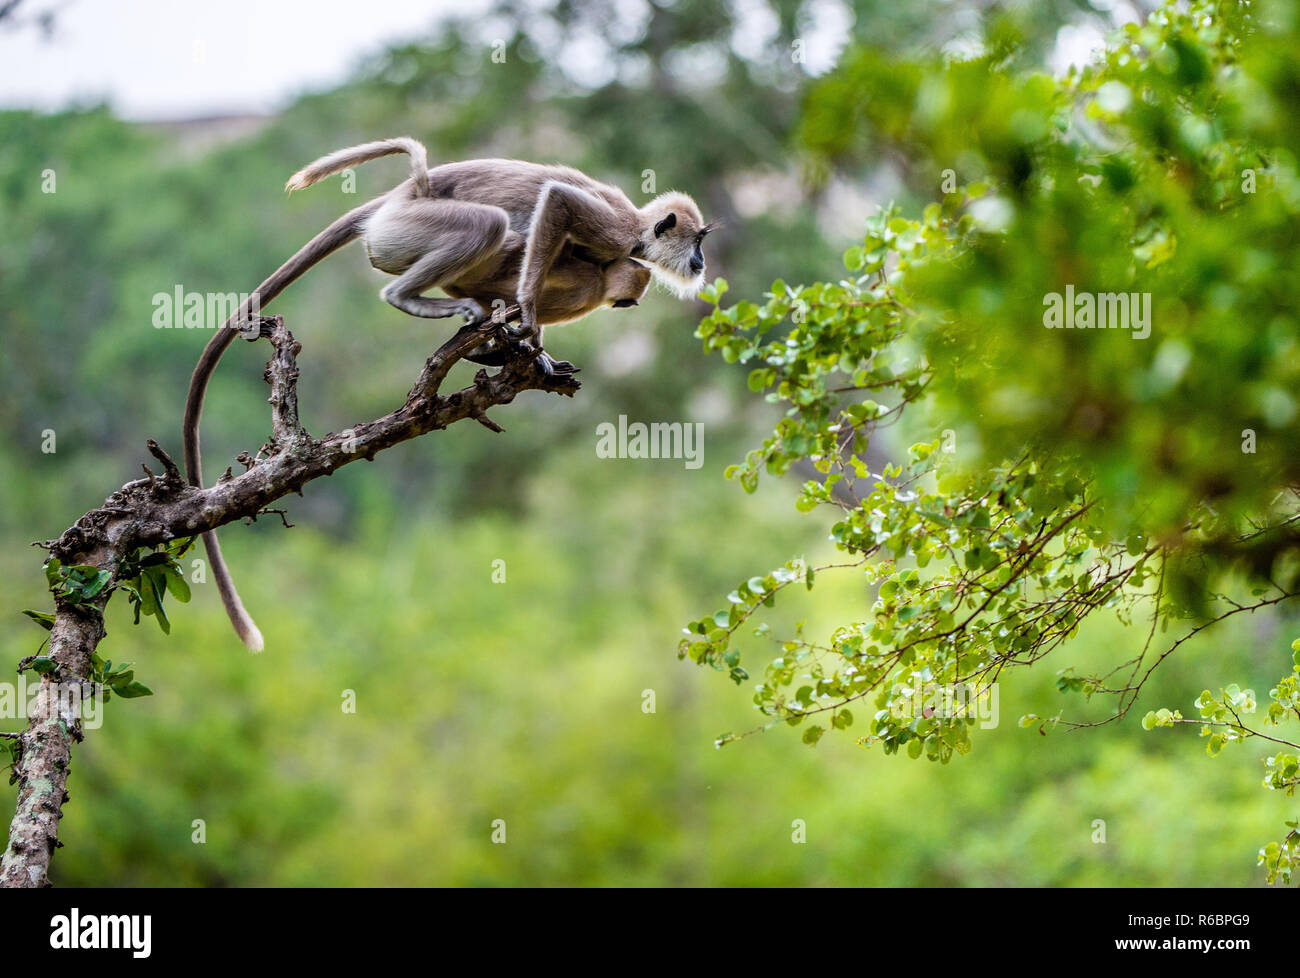 Langur with a cub jumping on a tree. Tufted gray langur (Semnopithecus priam), also known as Madras gray langur, and Coromandel sacred langur. Stock Photo